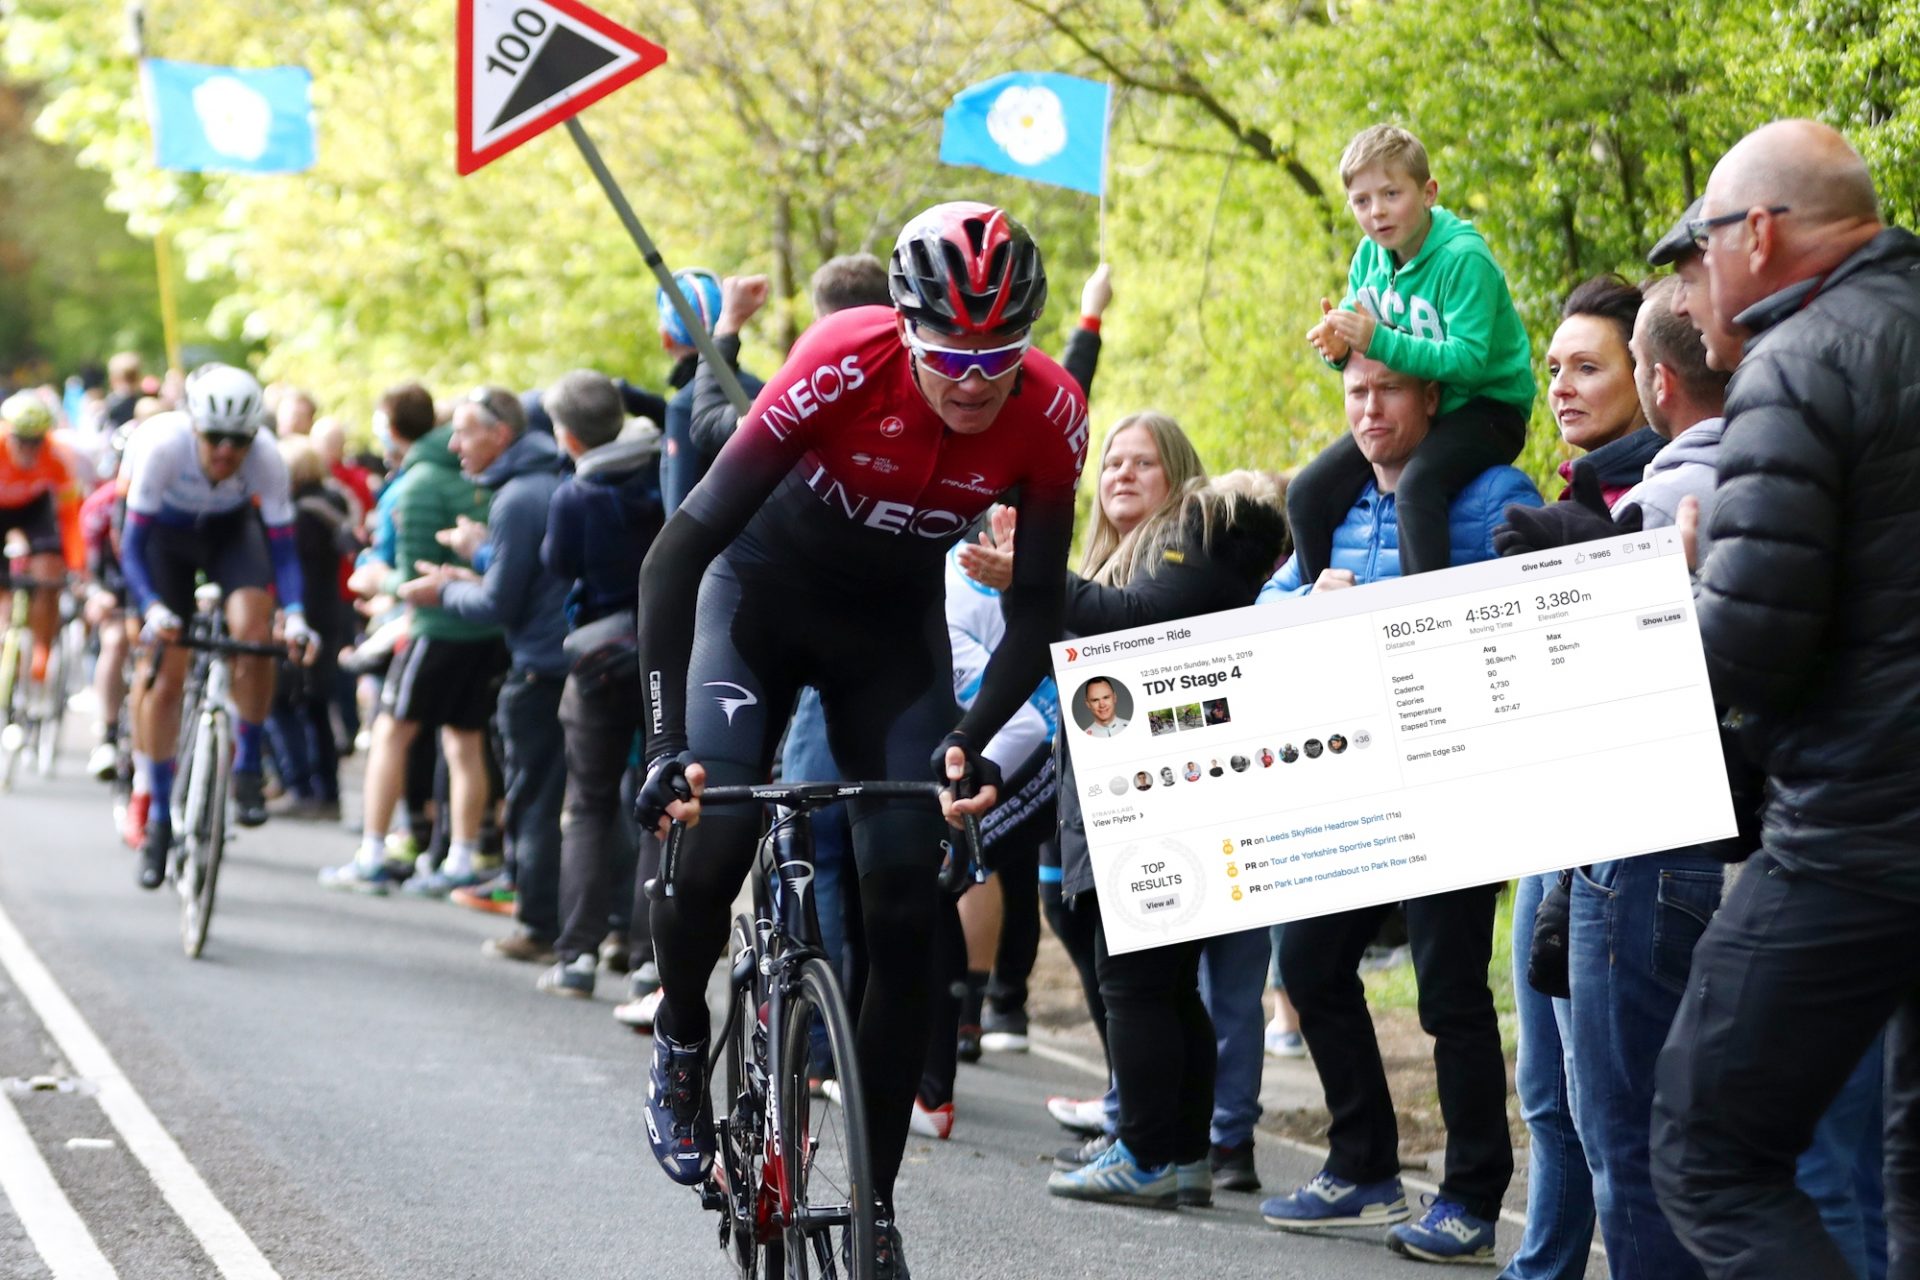 https://www.cyclingweekly.com/news/racing/chris-froome-shares-strava-stats-tough-final-tour-de-yorkshire-stage-422613